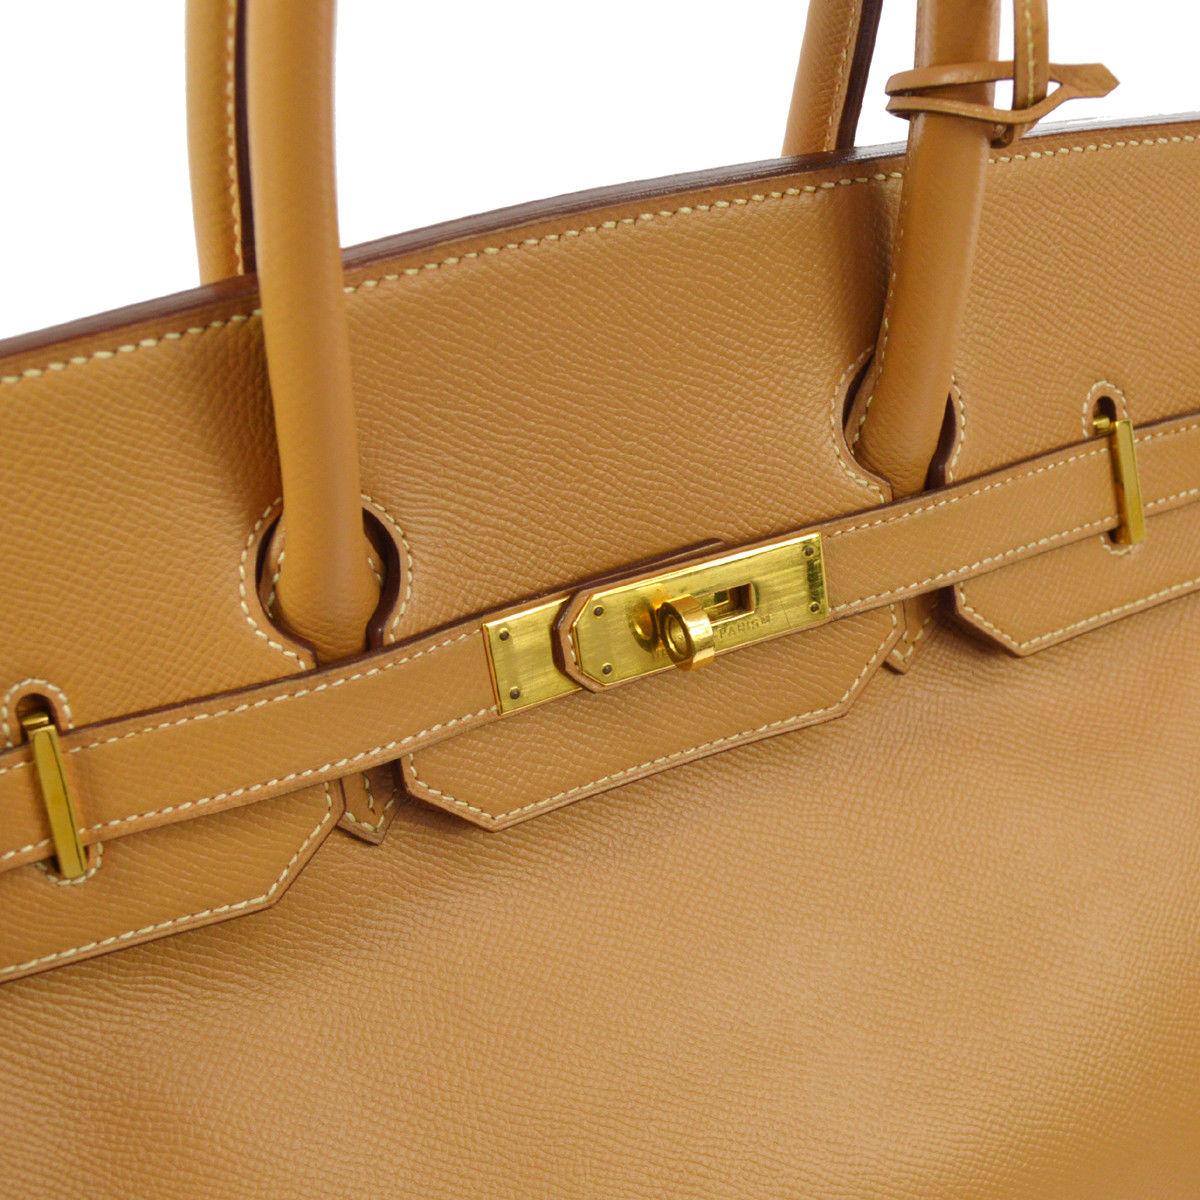 Hermes Birkin 35 Cognac Leather Top Handle Satchel Carryall Tote Bag W/Accessories

Leather 
Gold tone hardware
Leather lining 
Made in France
Handle drop 3